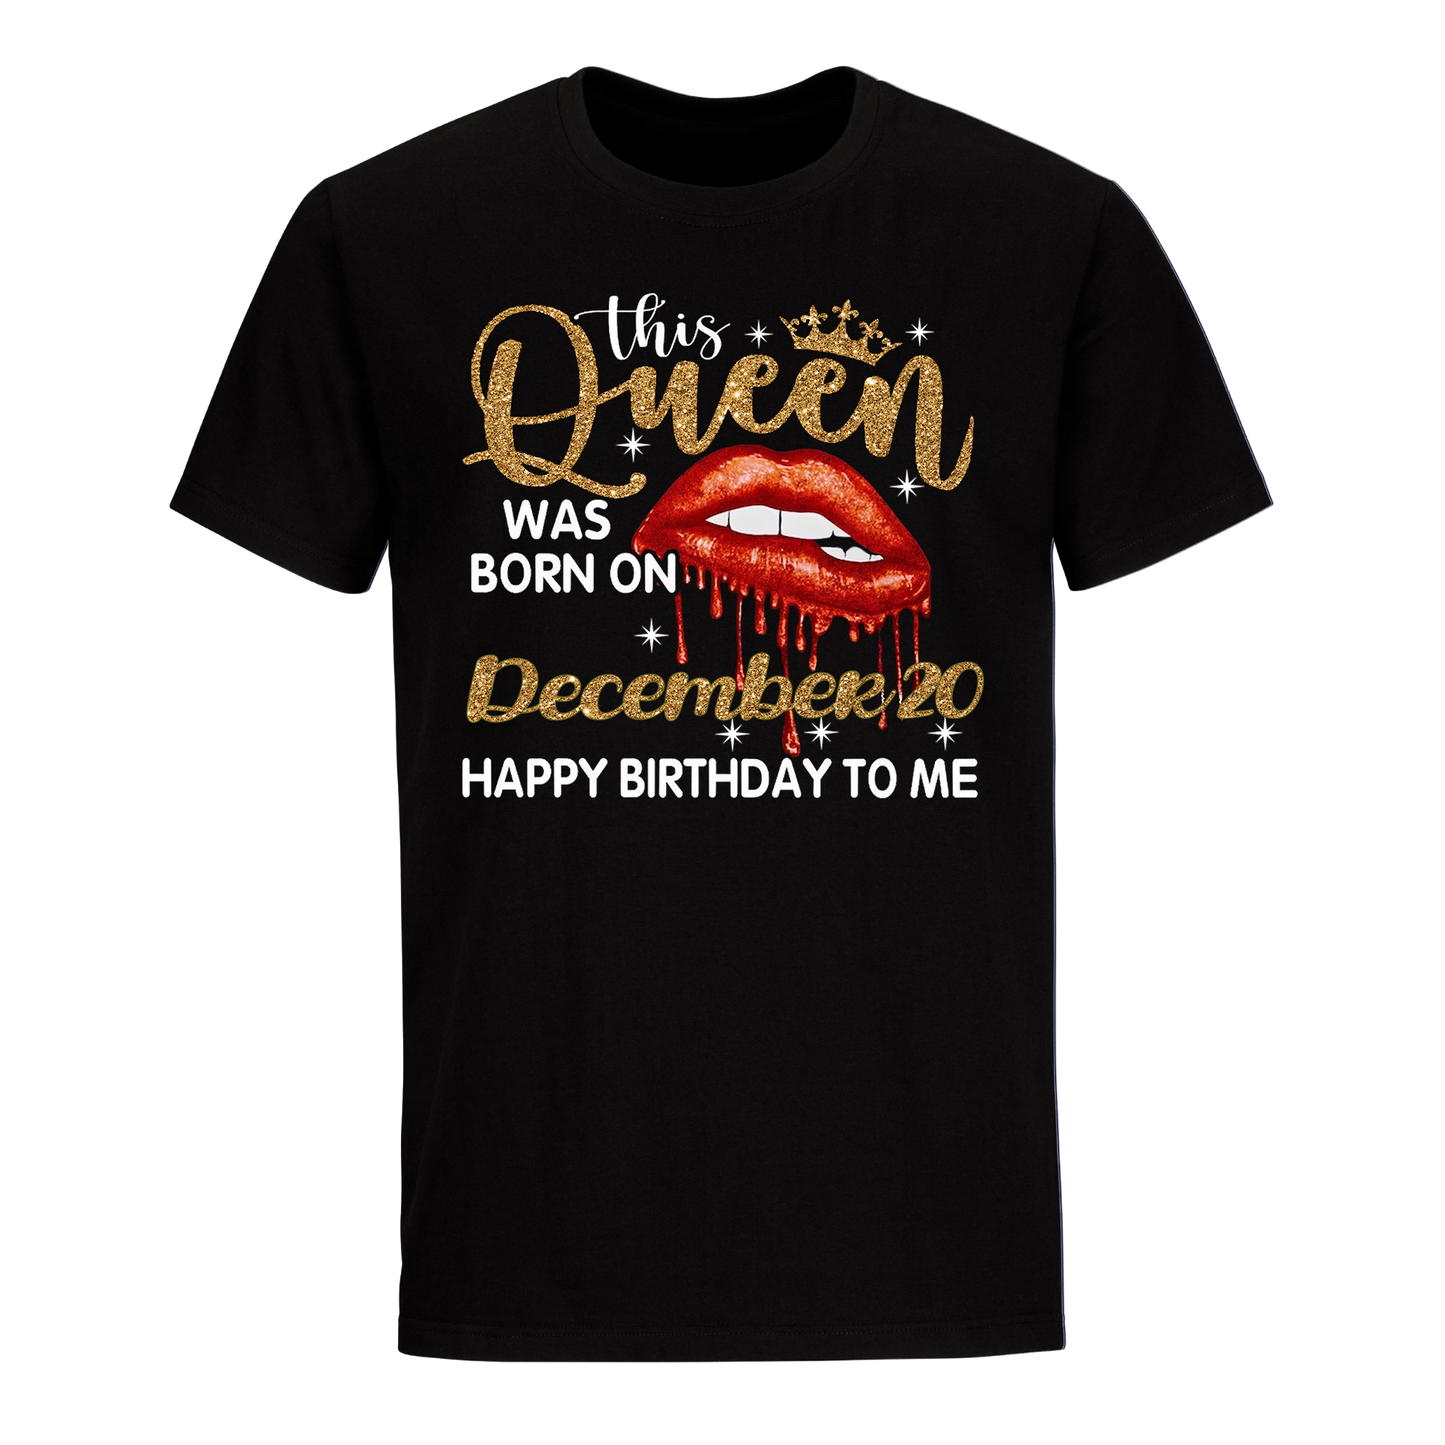 THIS QUEEN WAS BORN ON DECEMBER 20 UNISEX SHIRT